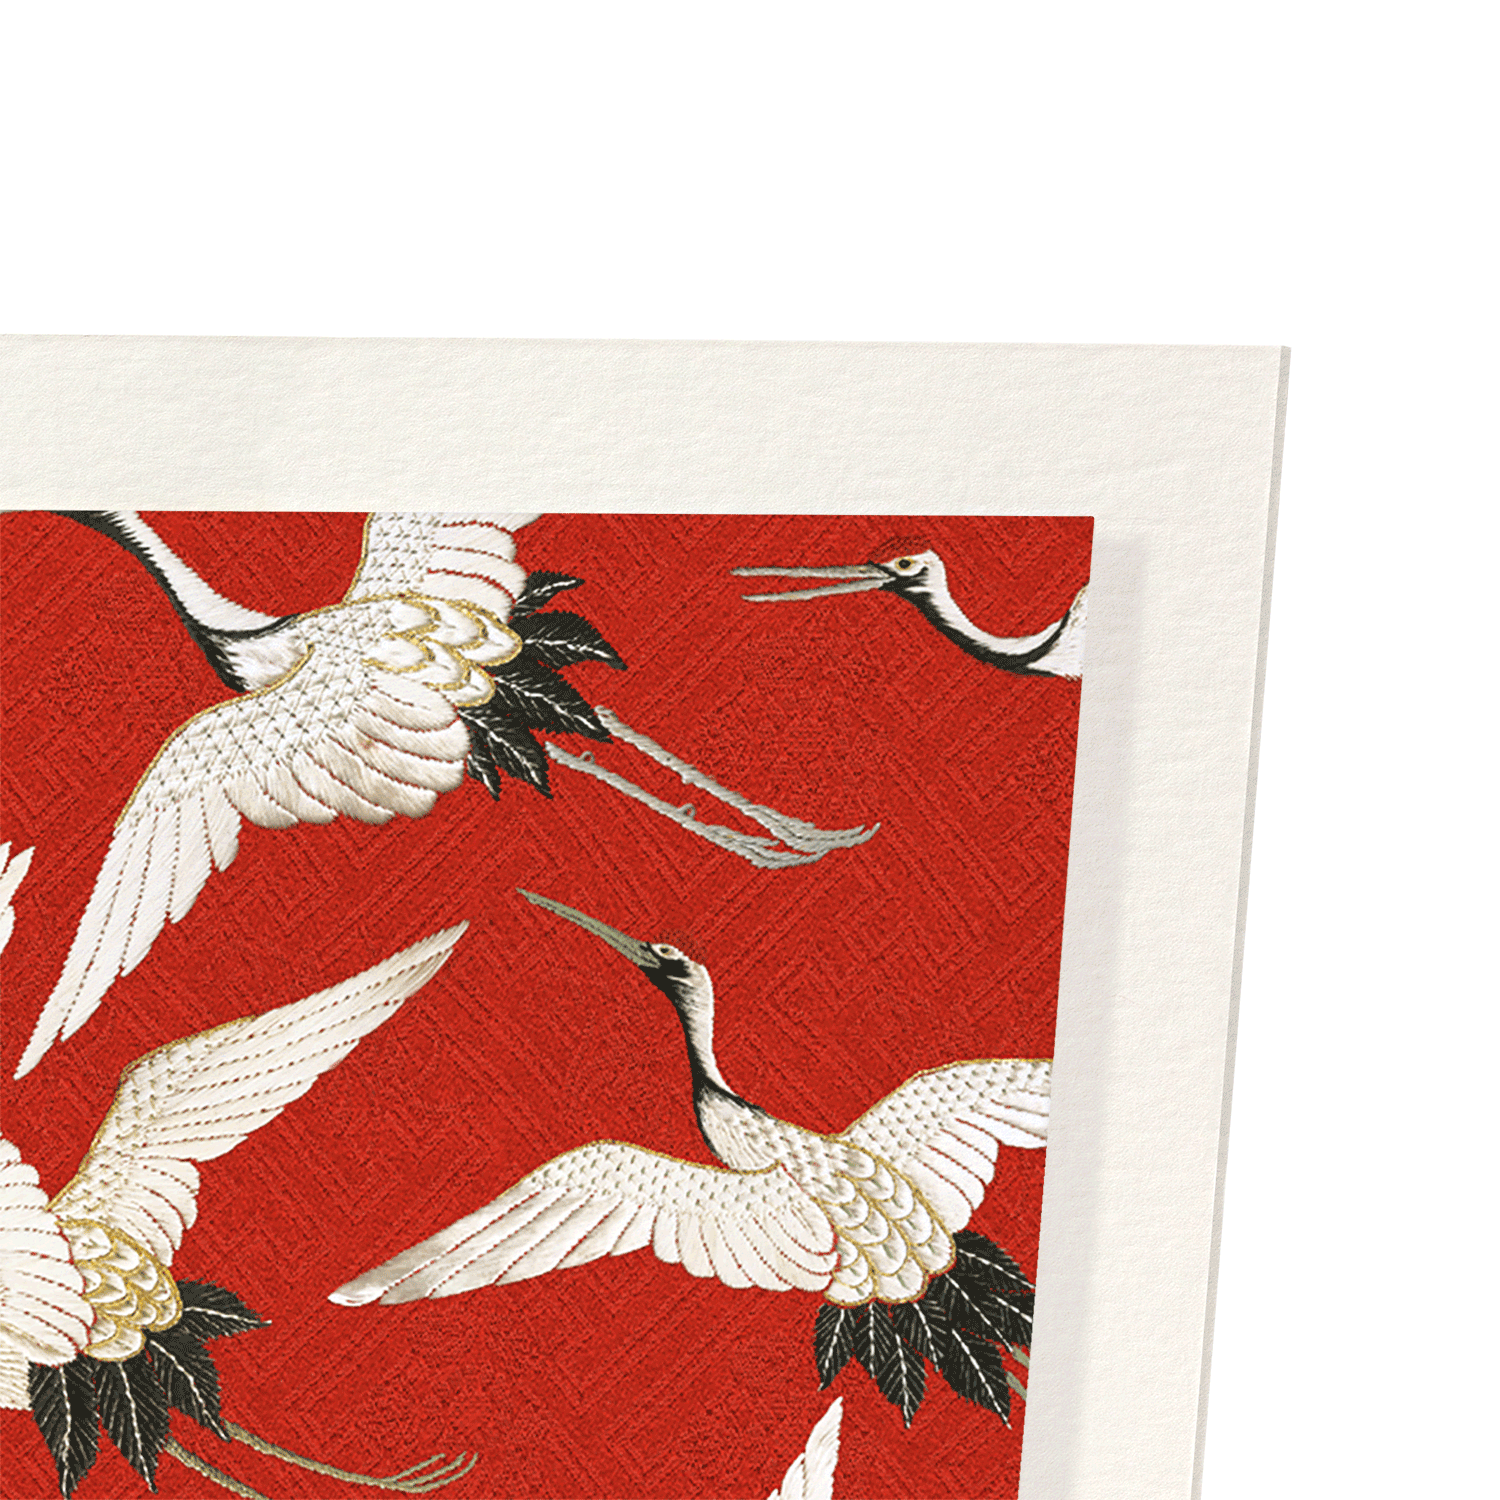 CRANE EMBROIDERY ON RED : Pattern Art Print